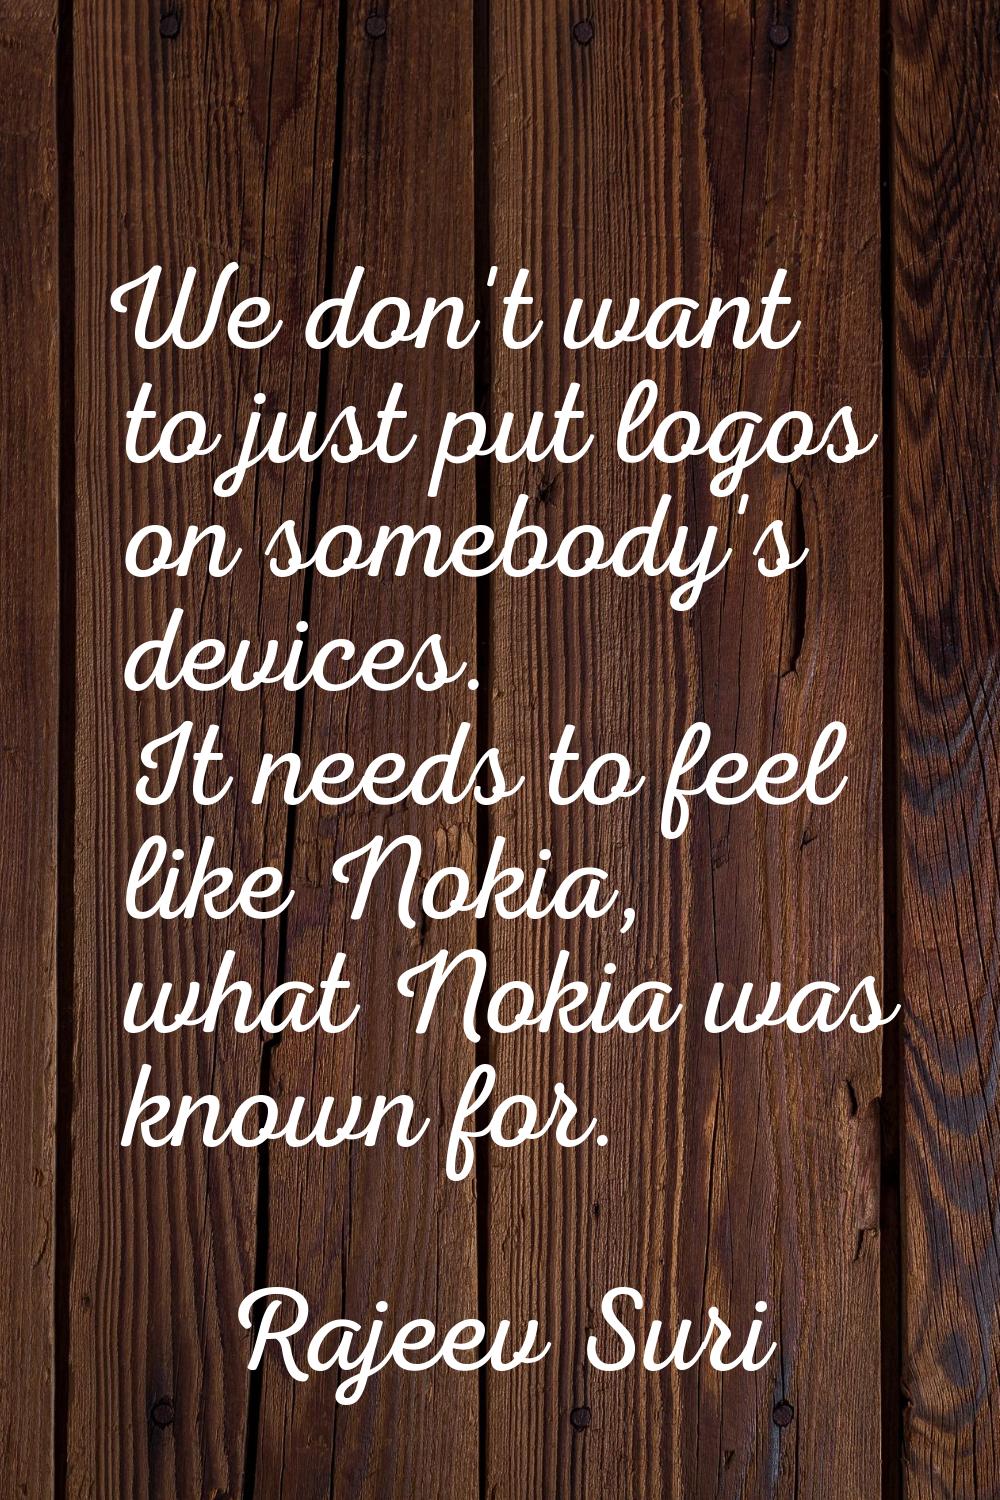 We don't want to just put logos on somebody's devices. It needs to feel like Nokia, what Nokia was 